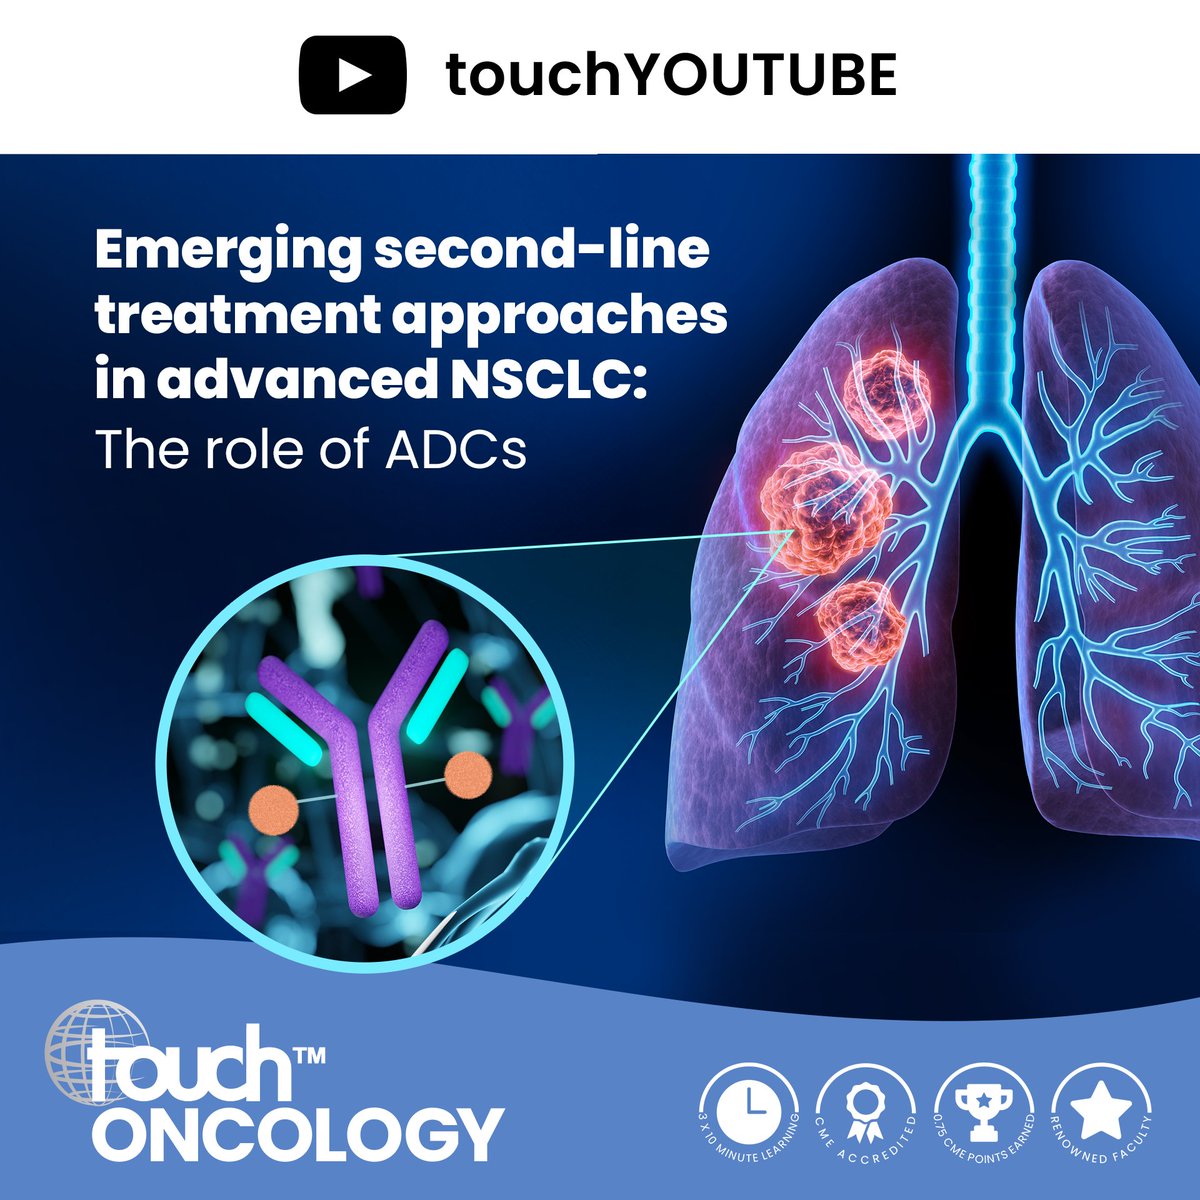 Have you seen our latest #YouTube video? Emerging second-line treatment approaches in advanced NSCLC: The role of ADCs Watch now: youtu.be/sgqnNm-9bwY #LungCancer #Lung #NSCLC #ADCs #CancerResearch